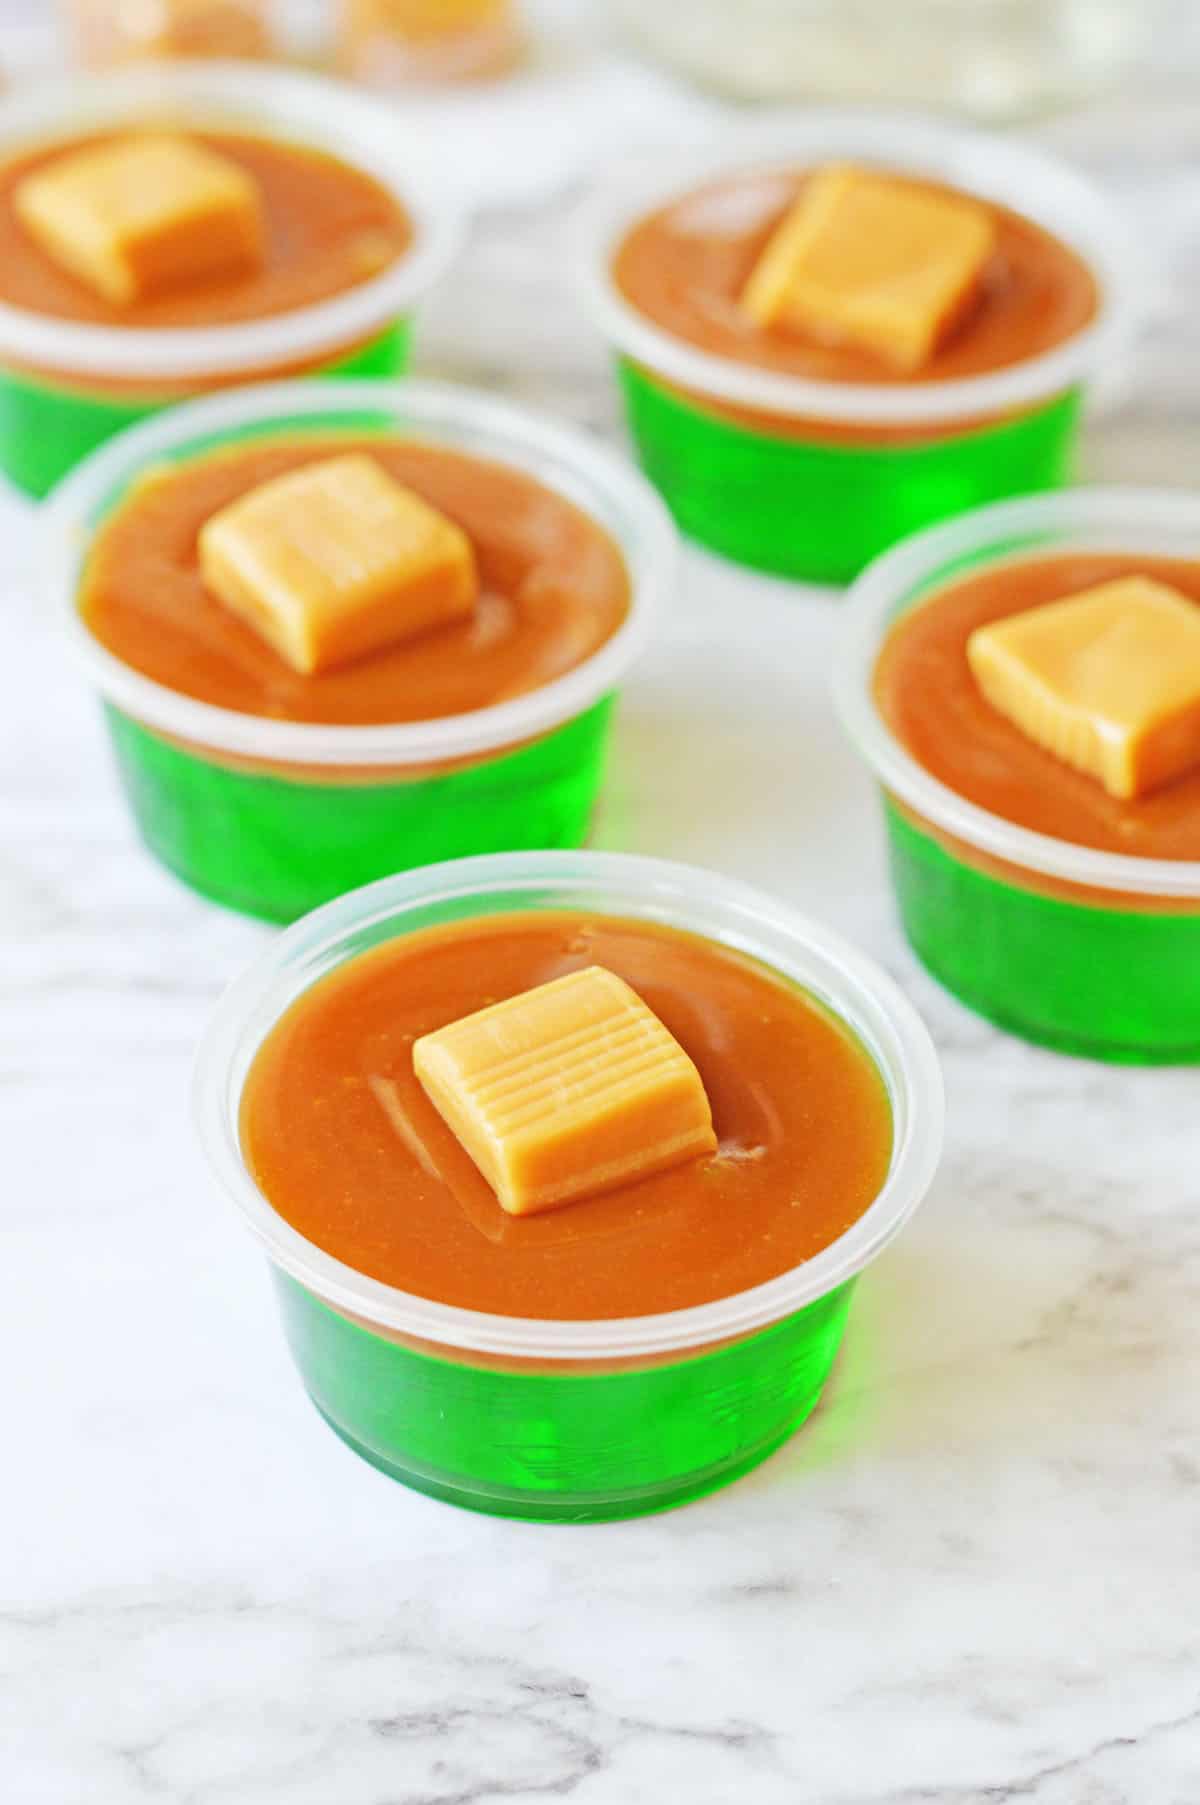 Green Jello shots with caramel layer and caramel candy on top.